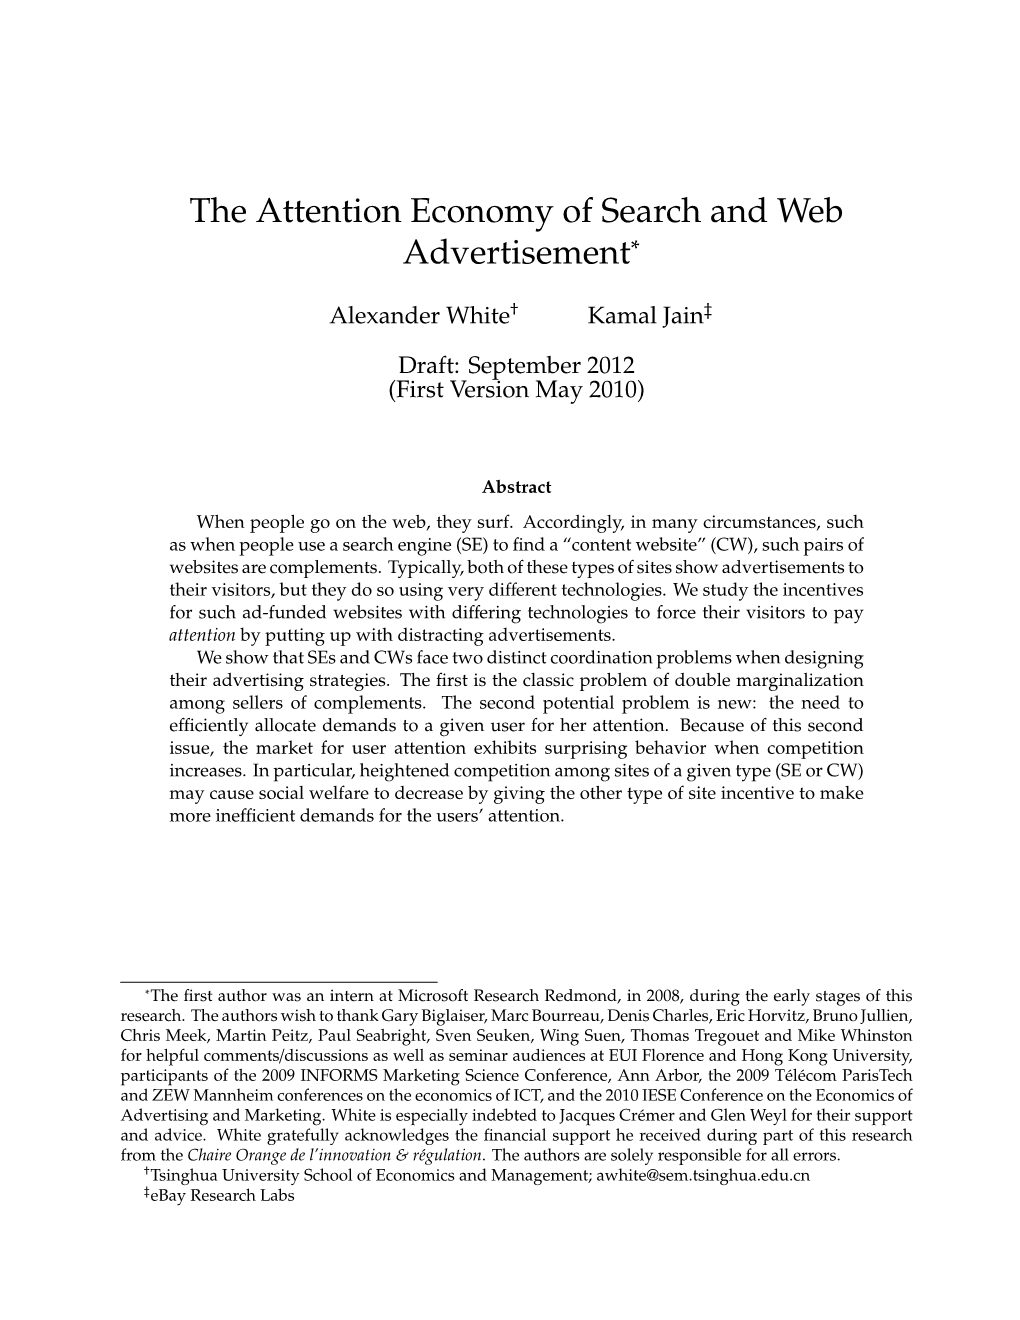 The Attention Economy of Search and Web Advertisement∗